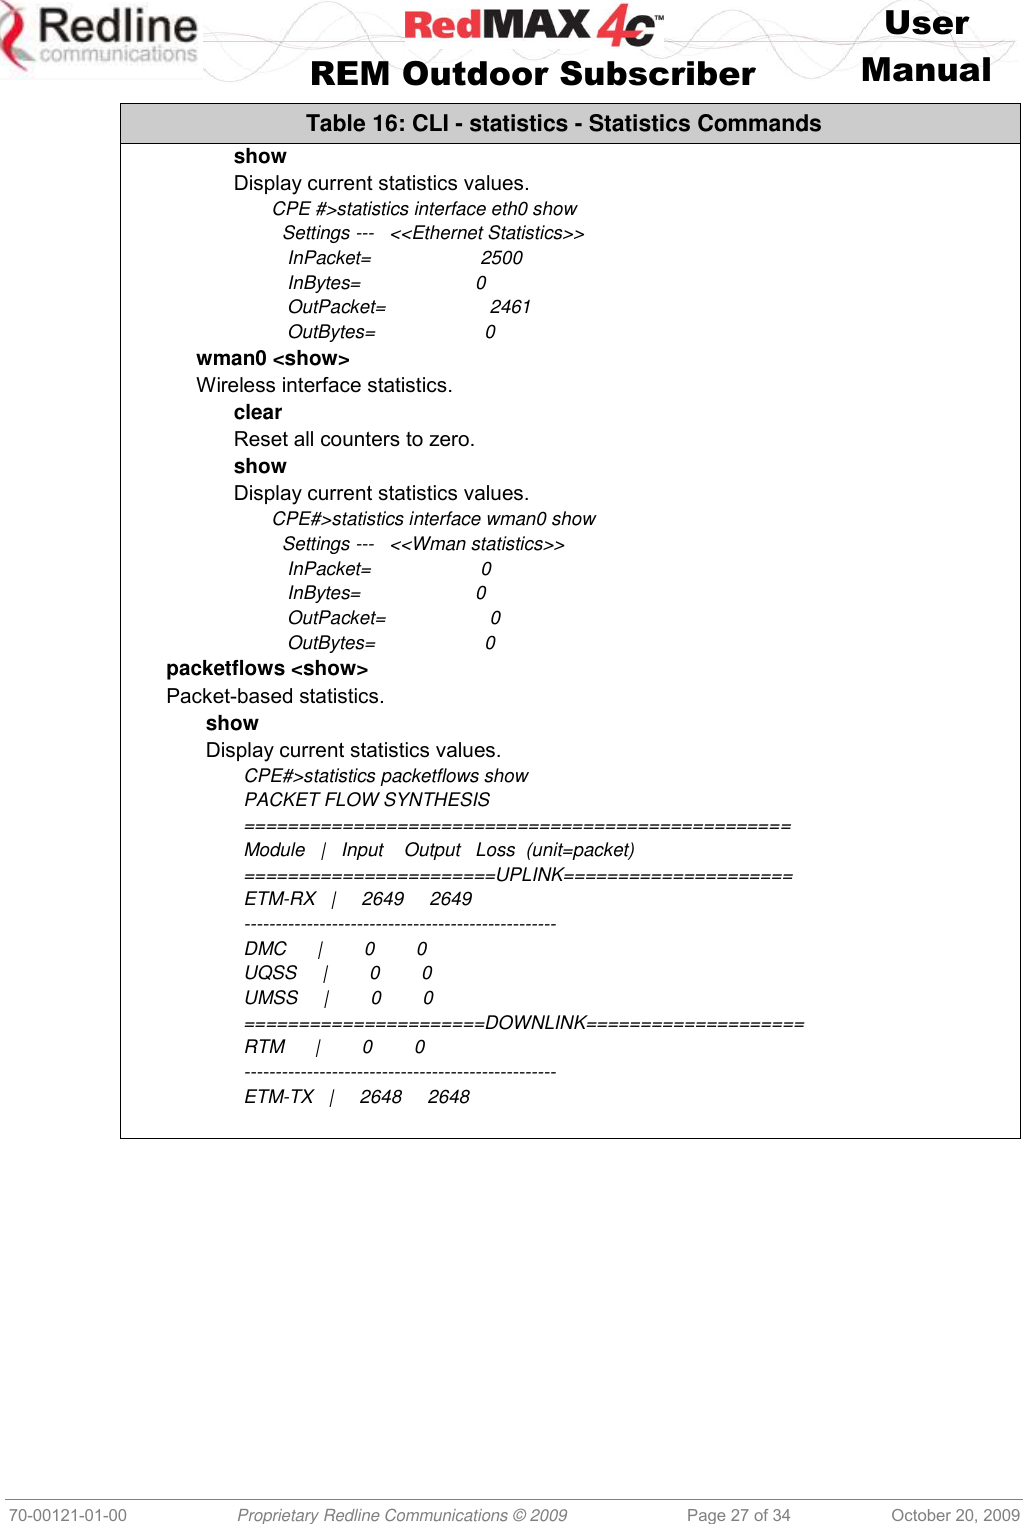    User   REM Outdoor Subscriber  Manual   70-00121-01-00 Proprietary Redline Communications © 2009 Page 27 of 34 October 20, 2009 Table 16: CLI - statistics - Statistics Commands show Display current statistics values. CPE #&gt;statistics interface eth0 show   Settings ---   &lt;&lt;Ethernet Statistics&gt;&gt;    InPacket=                     2500    InBytes=                      0    OutPacket=                    2461    OutBytes=                     0 wman0 &lt;show&gt; Wireless interface statistics. clear Reset all counters to zero. show Display current statistics values. CPE#&gt;statistics interface wman0 show   Settings ---   &lt;&lt;Wman statistics&gt;&gt;    InPacket=                     0    InBytes=                      0    OutPacket=                    0    OutBytes=                     0 packetflows &lt;show&gt; Packet-based statistics. show Display current statistics values. CPE#&gt;statistics packetflows show PACKET FLOW SYNTHESIS ================================================== Module   |   Input    Output   Loss  (unit=packet) =======================UPLINK===================== ETM-RX   |     2649     2649 -------------------------------------------------- DMC      |        0        0 UQSS     |        0        0 UMSS     |        0        0 ======================DOWNLINK==================== RTM      |        0        0 -------------------------------------------------- ETM-TX   |     2648     2648   